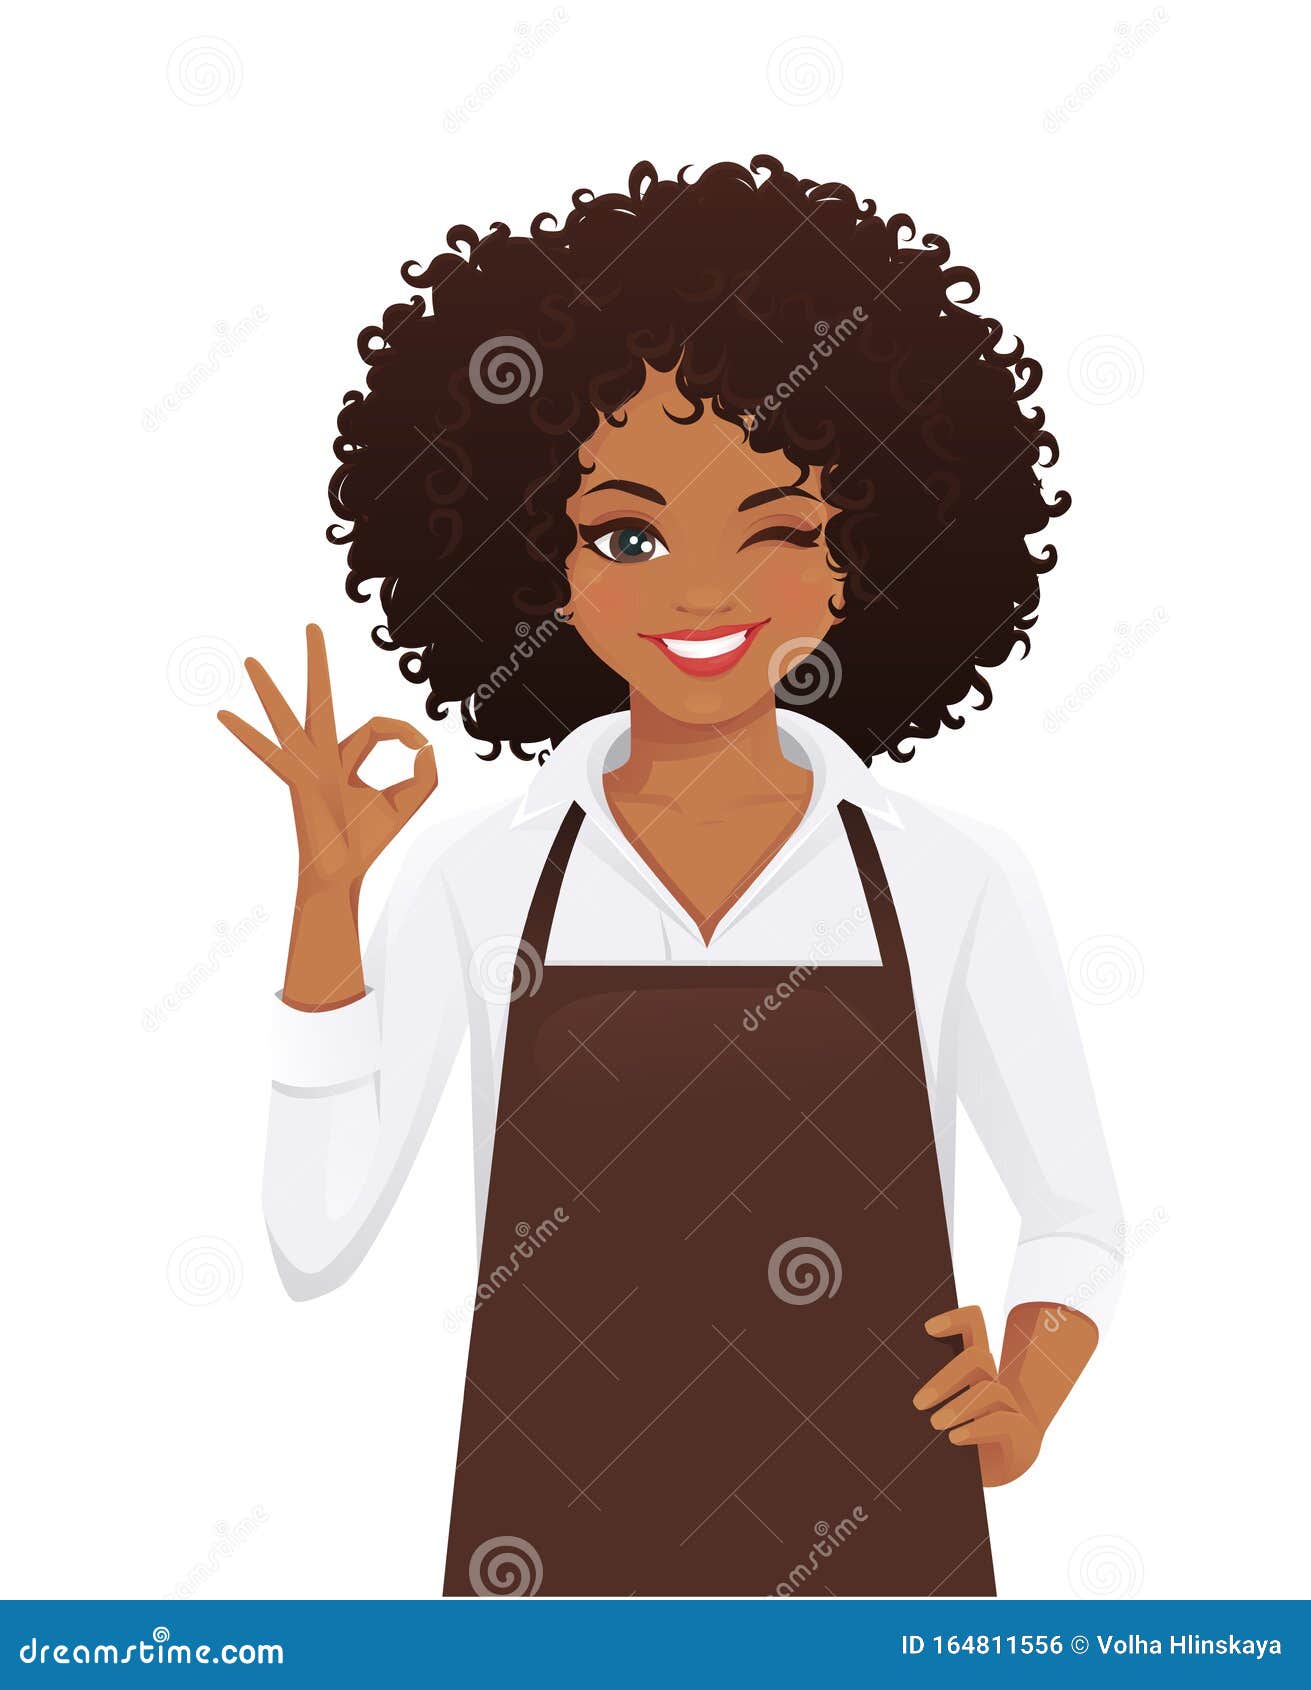 woman in apron gesturing ok sign